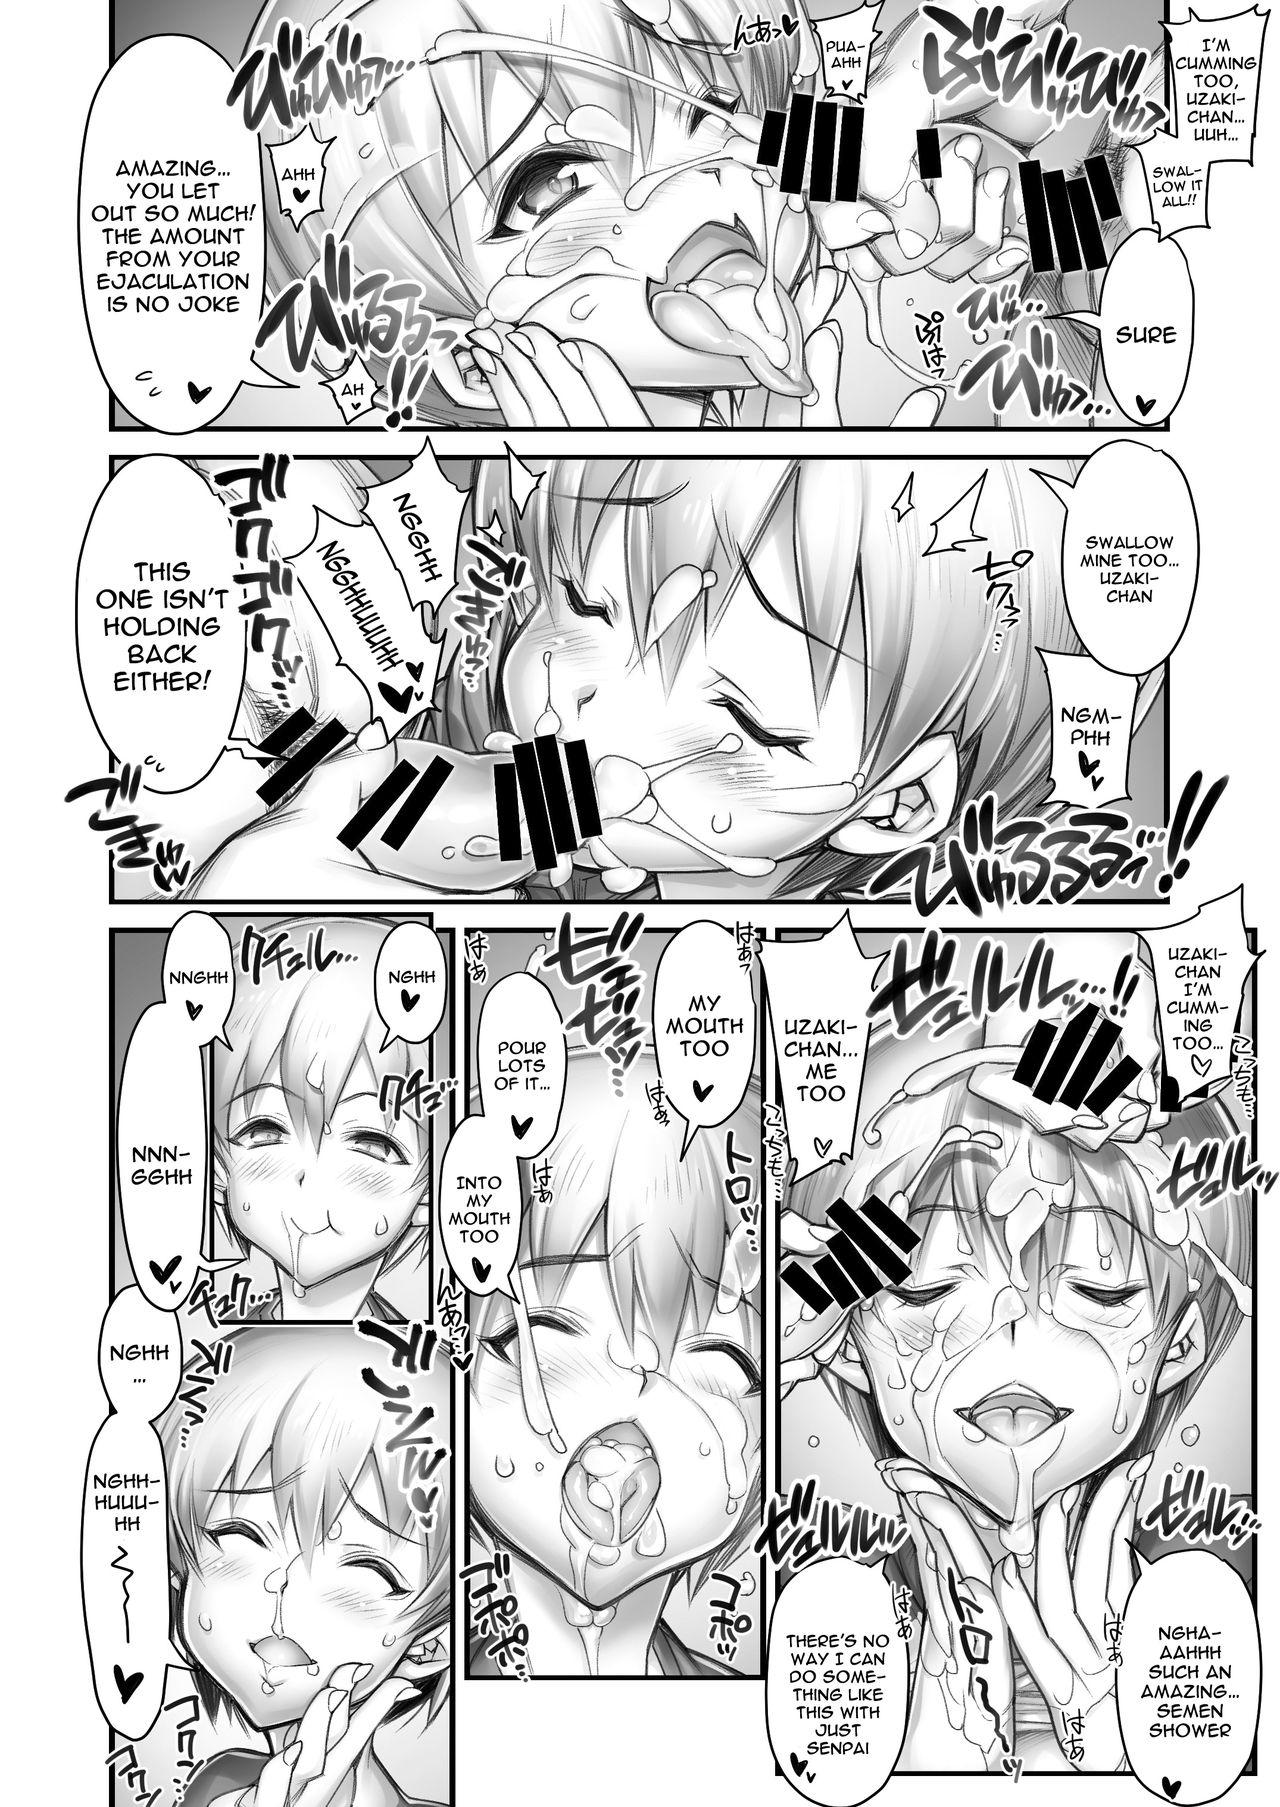 Oral Sex Uzaki-chan Wants To Message To Senpai Videos Of Her Having Sex With Lots of Men!! - Uzaki chan wa asobitai Homosexual - Page 8